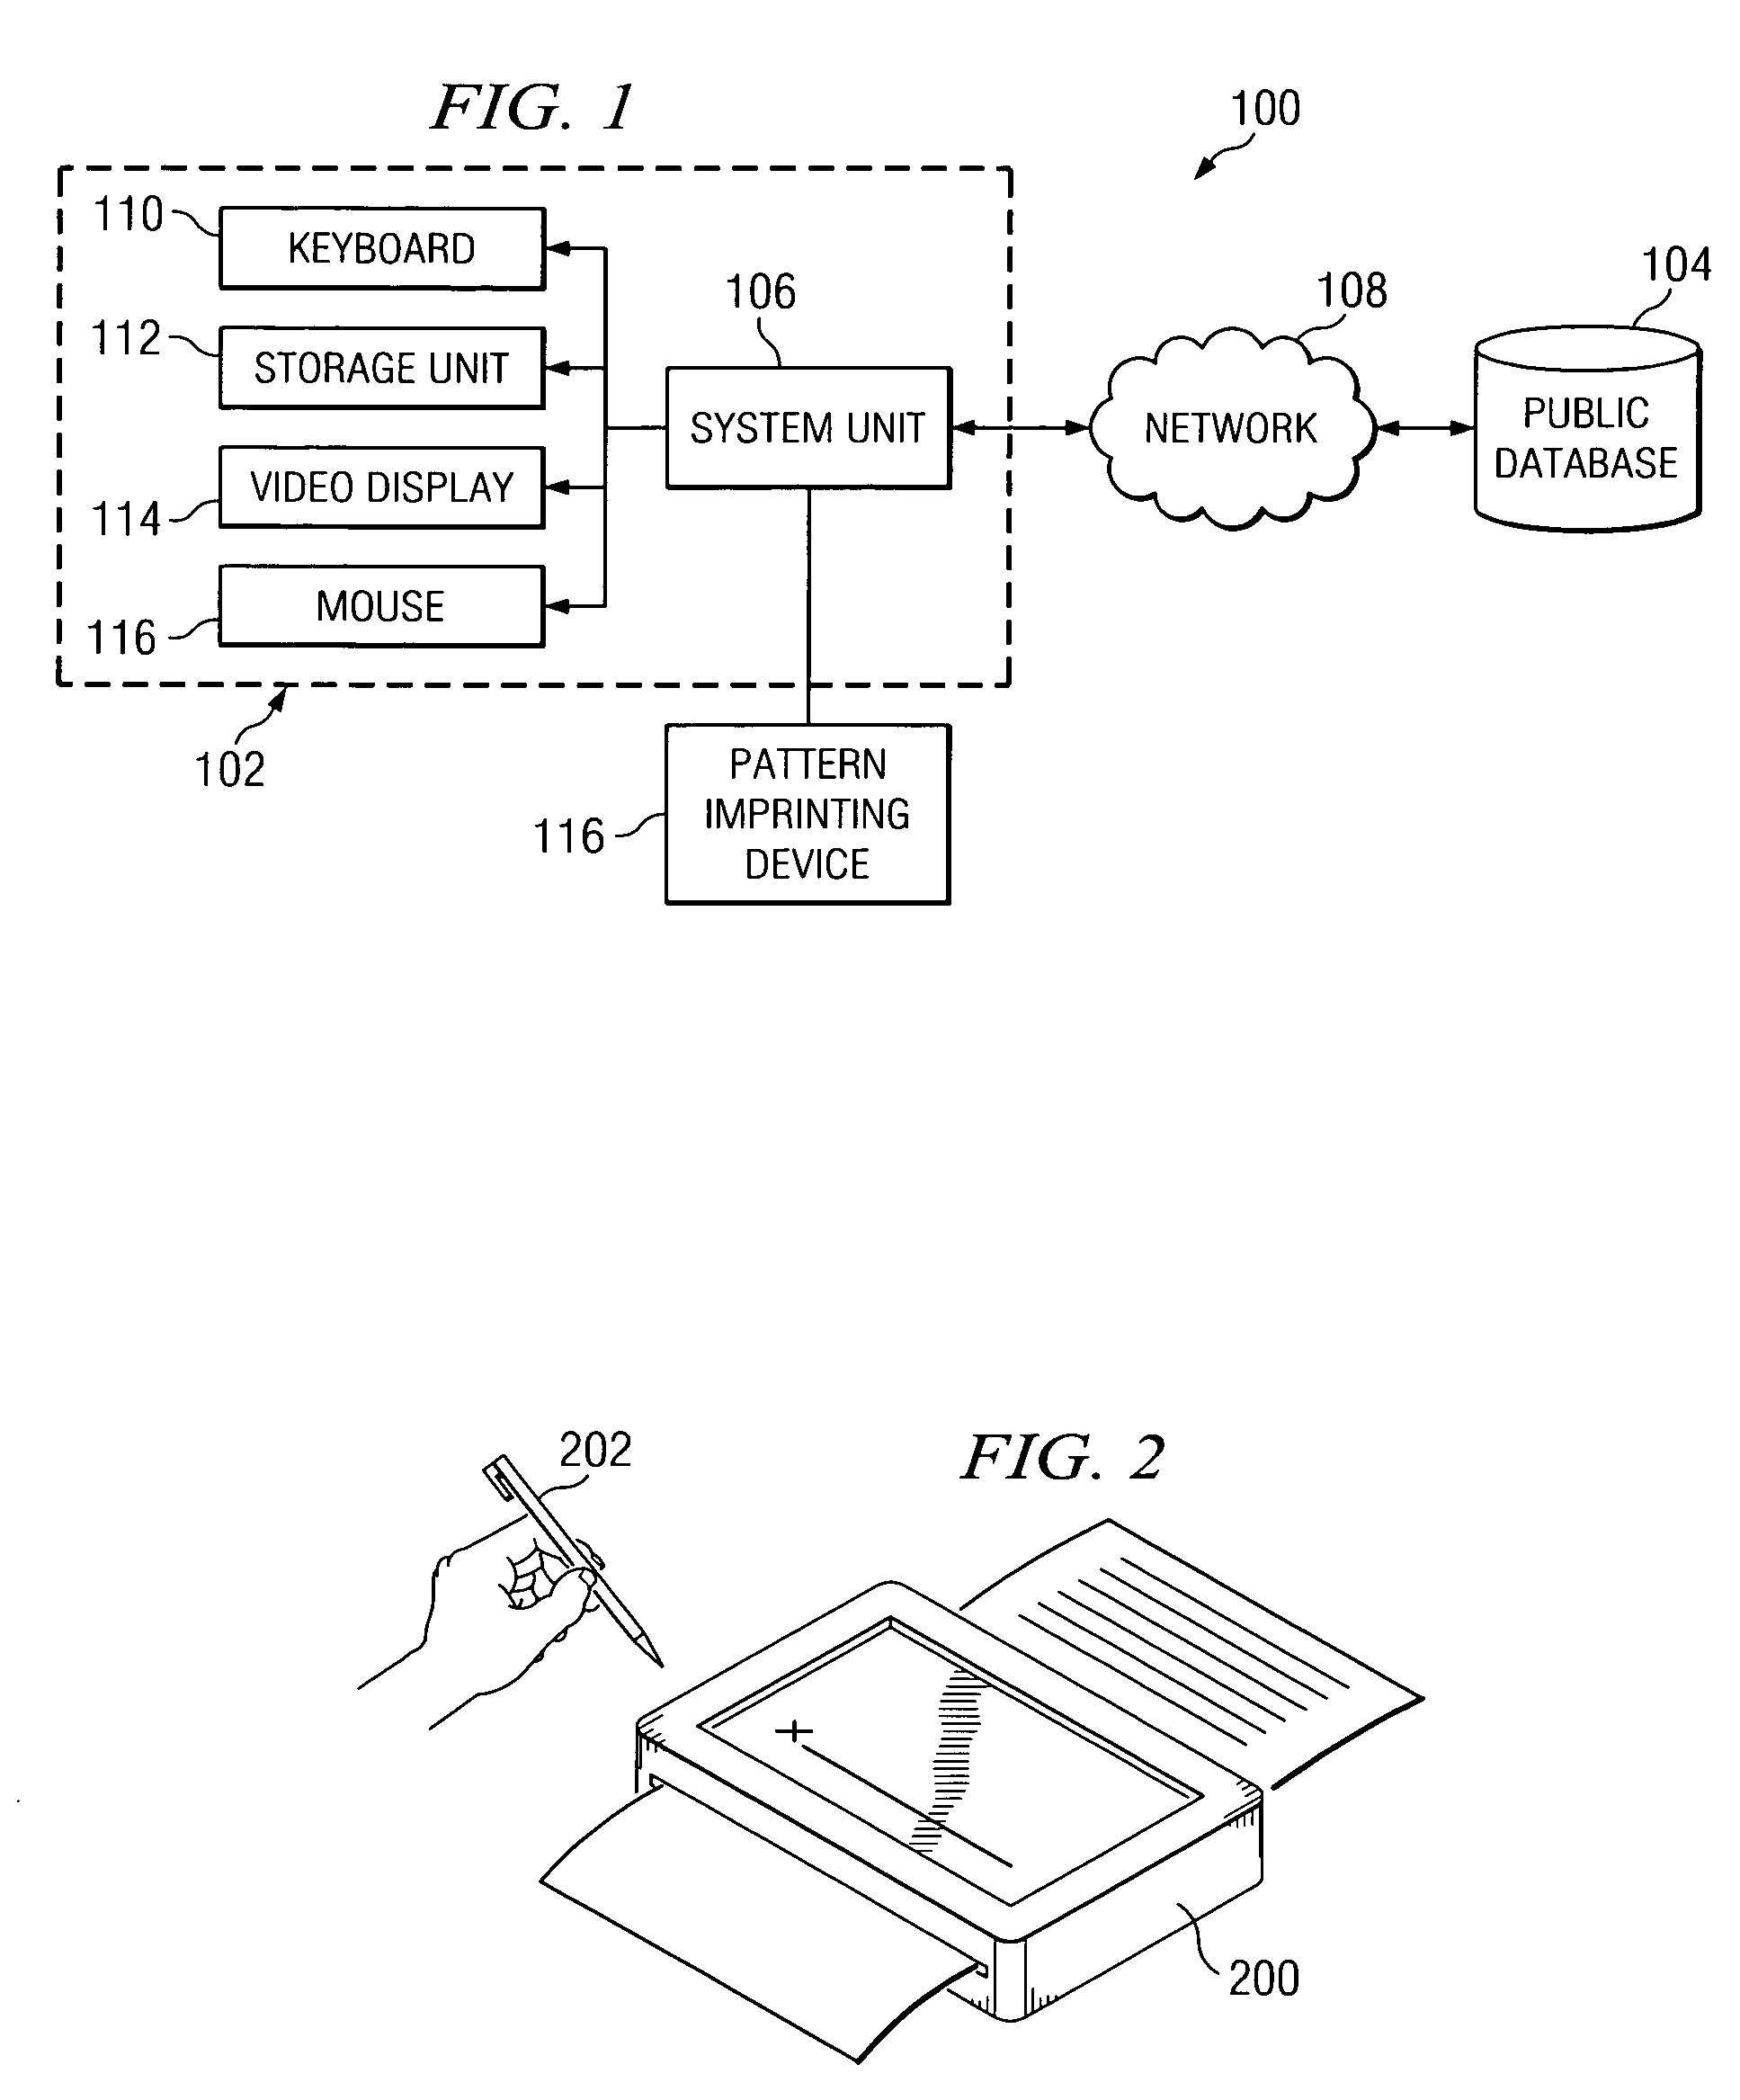 Mechanism for storing authenticity information about a written or printed document